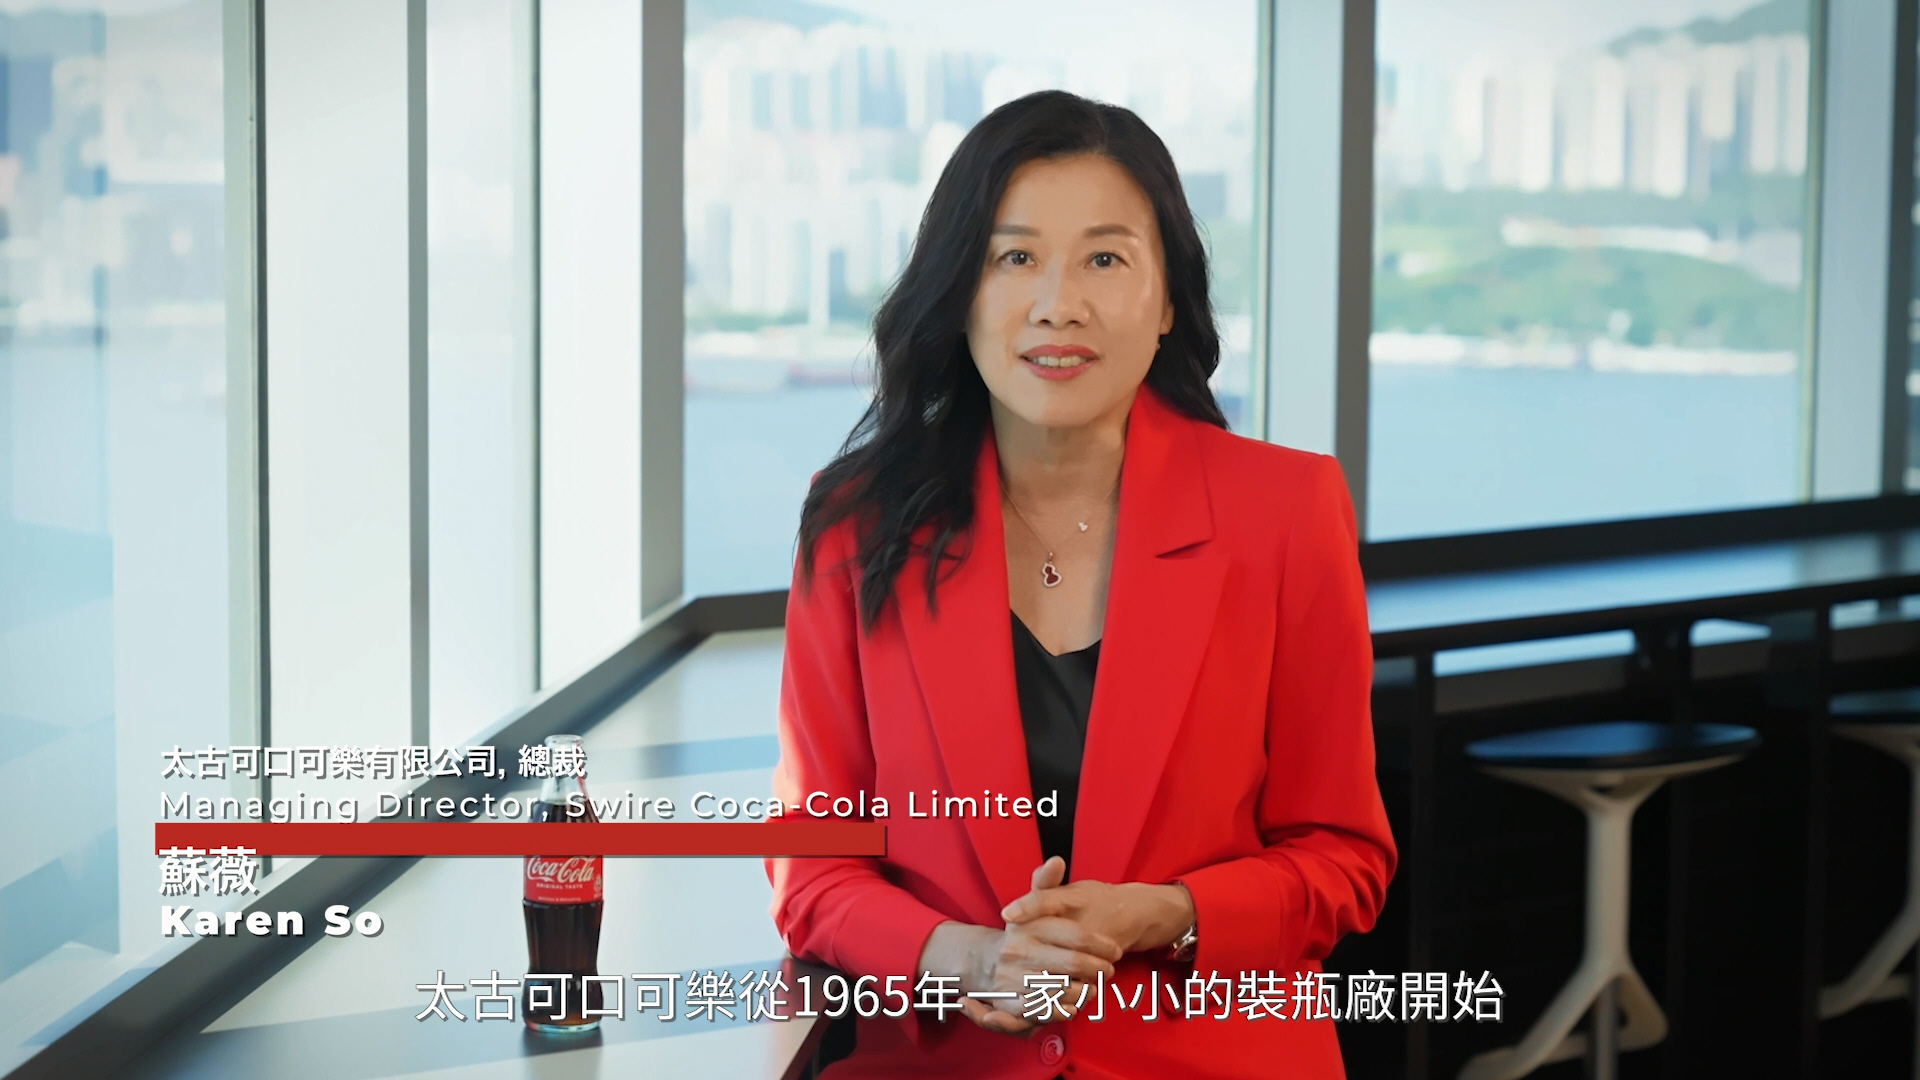 Swire Coca-Cola’s Managing Director Karen So talks about the winning essence of the company.